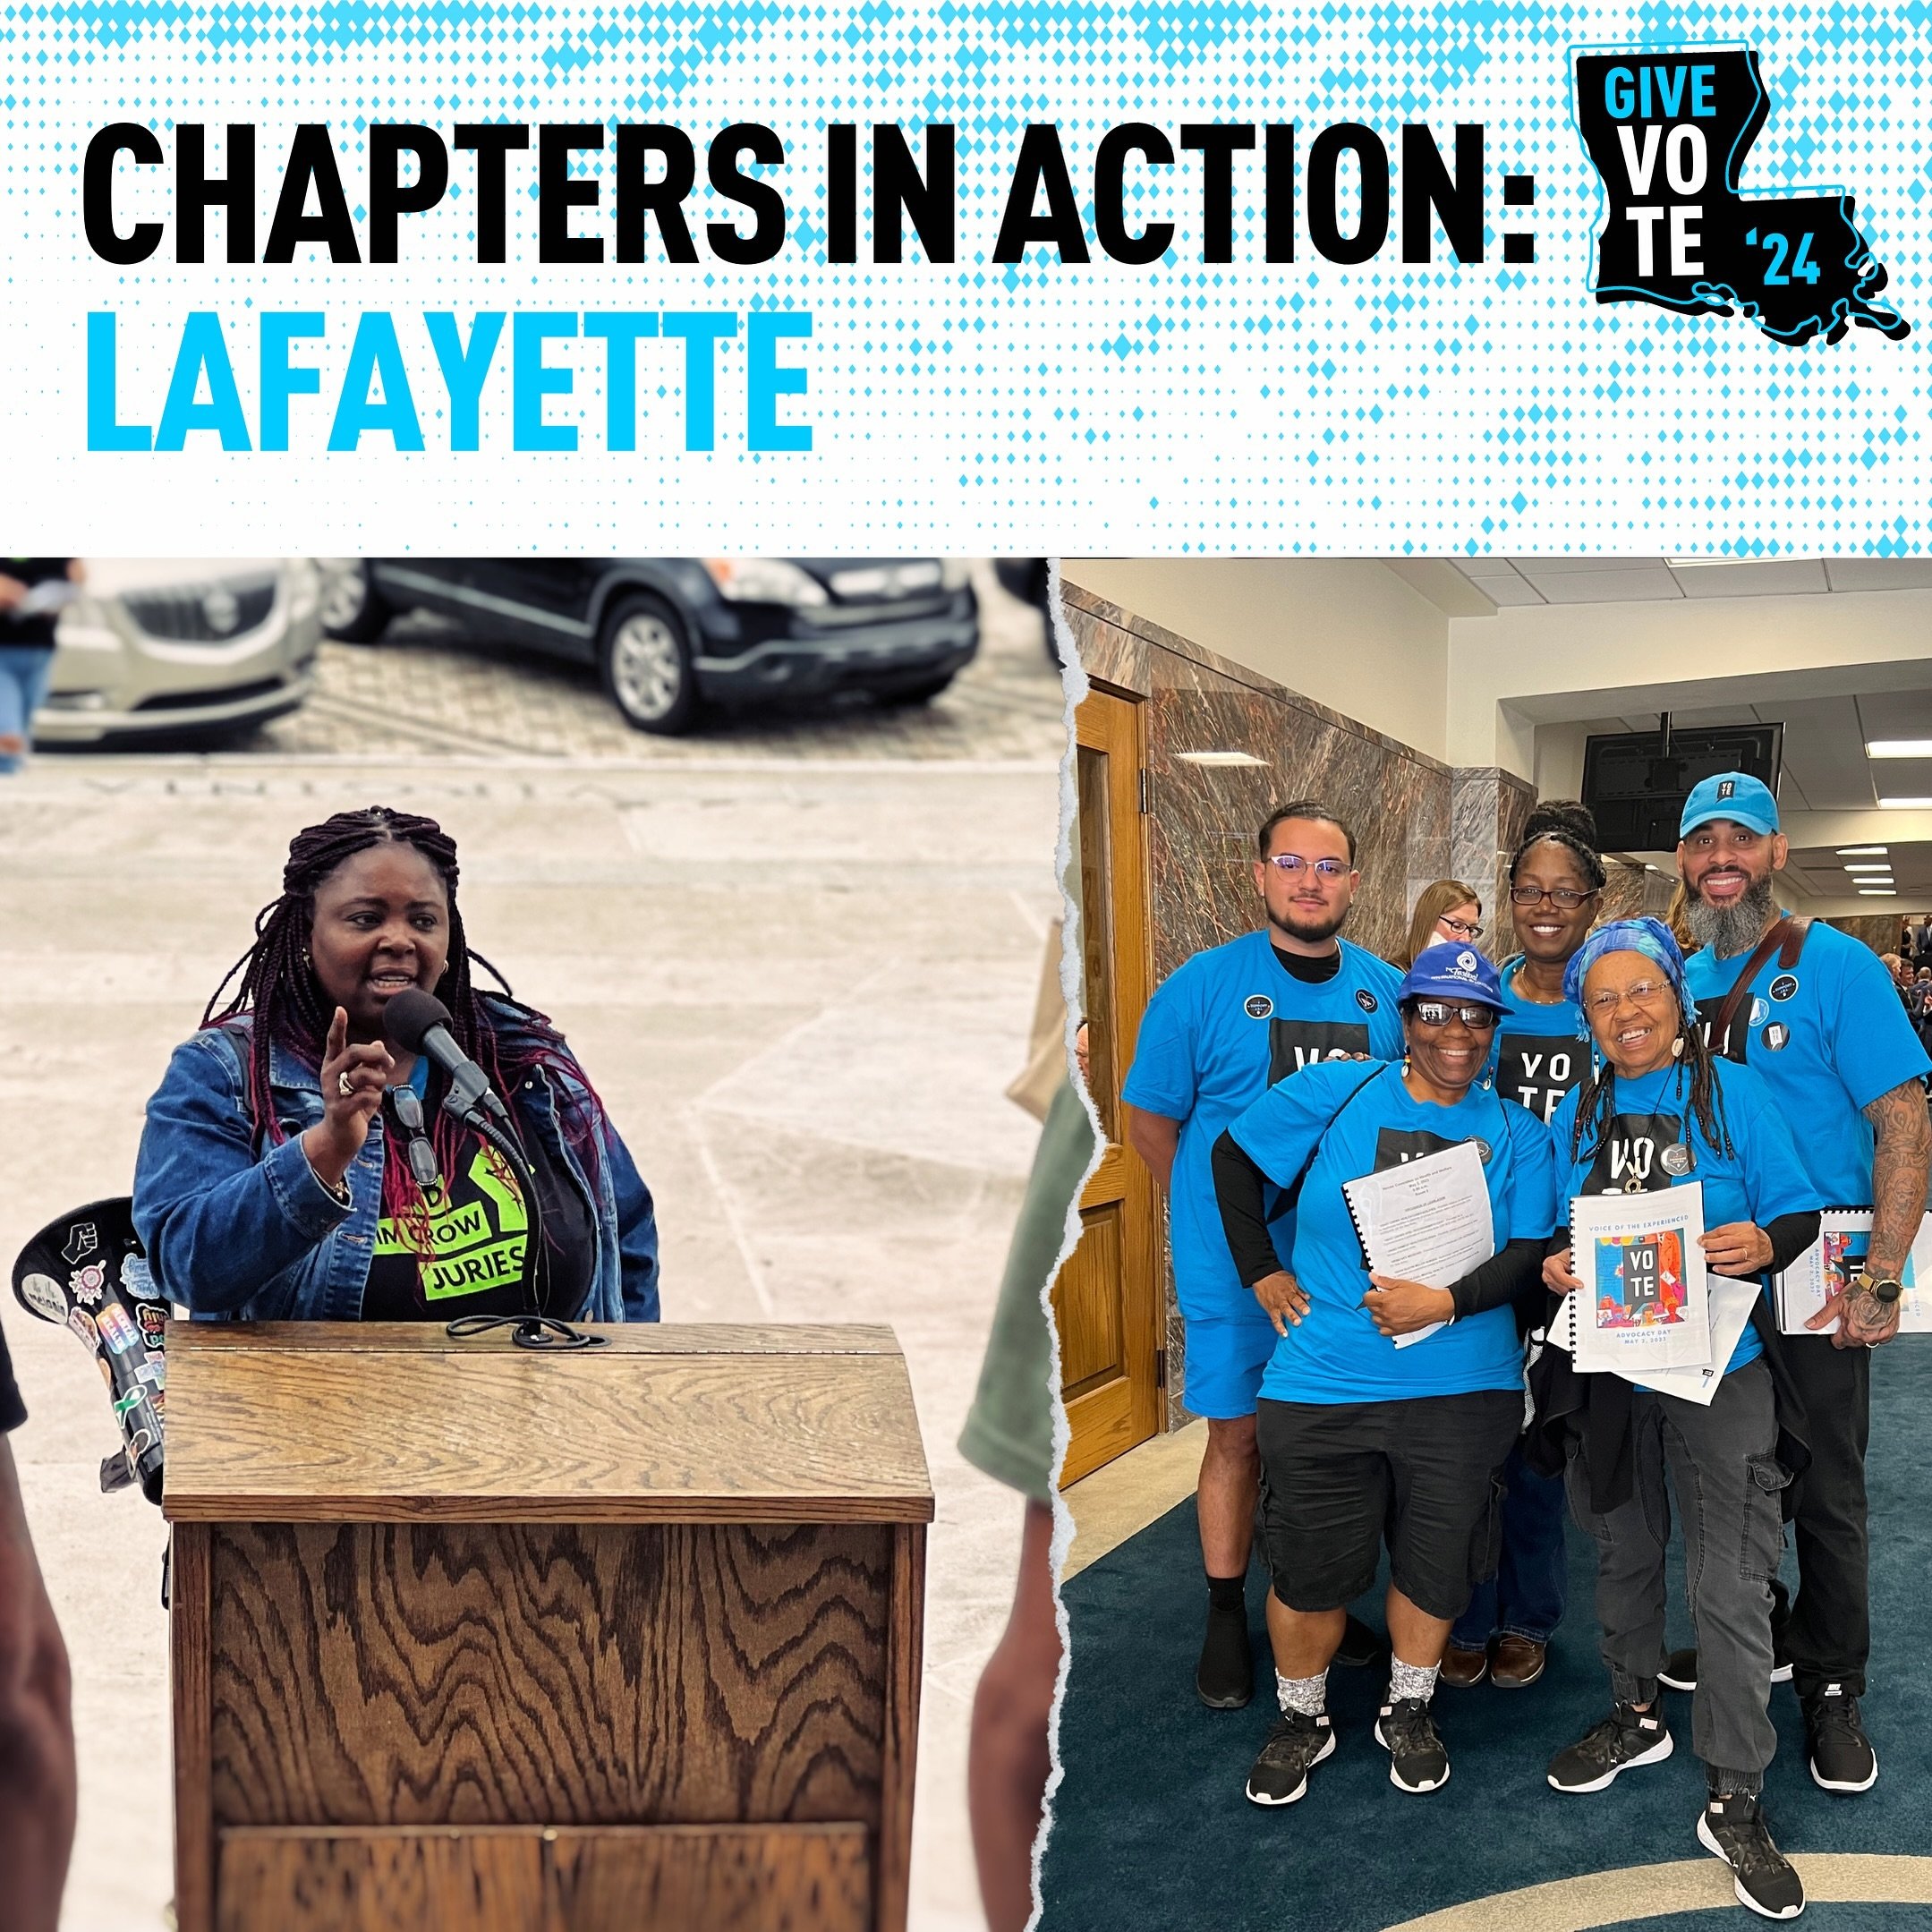 Our Lafayette chapter: THEN &amp; NOW&nbsp; ➡️
It's been 7 years since our first Lafayette member meeting! We formed the Lafayette chapter in 2017 starting out with chapter organizer, Consuela &quot;Sway&quot; Gaines, but the team grew over time as t